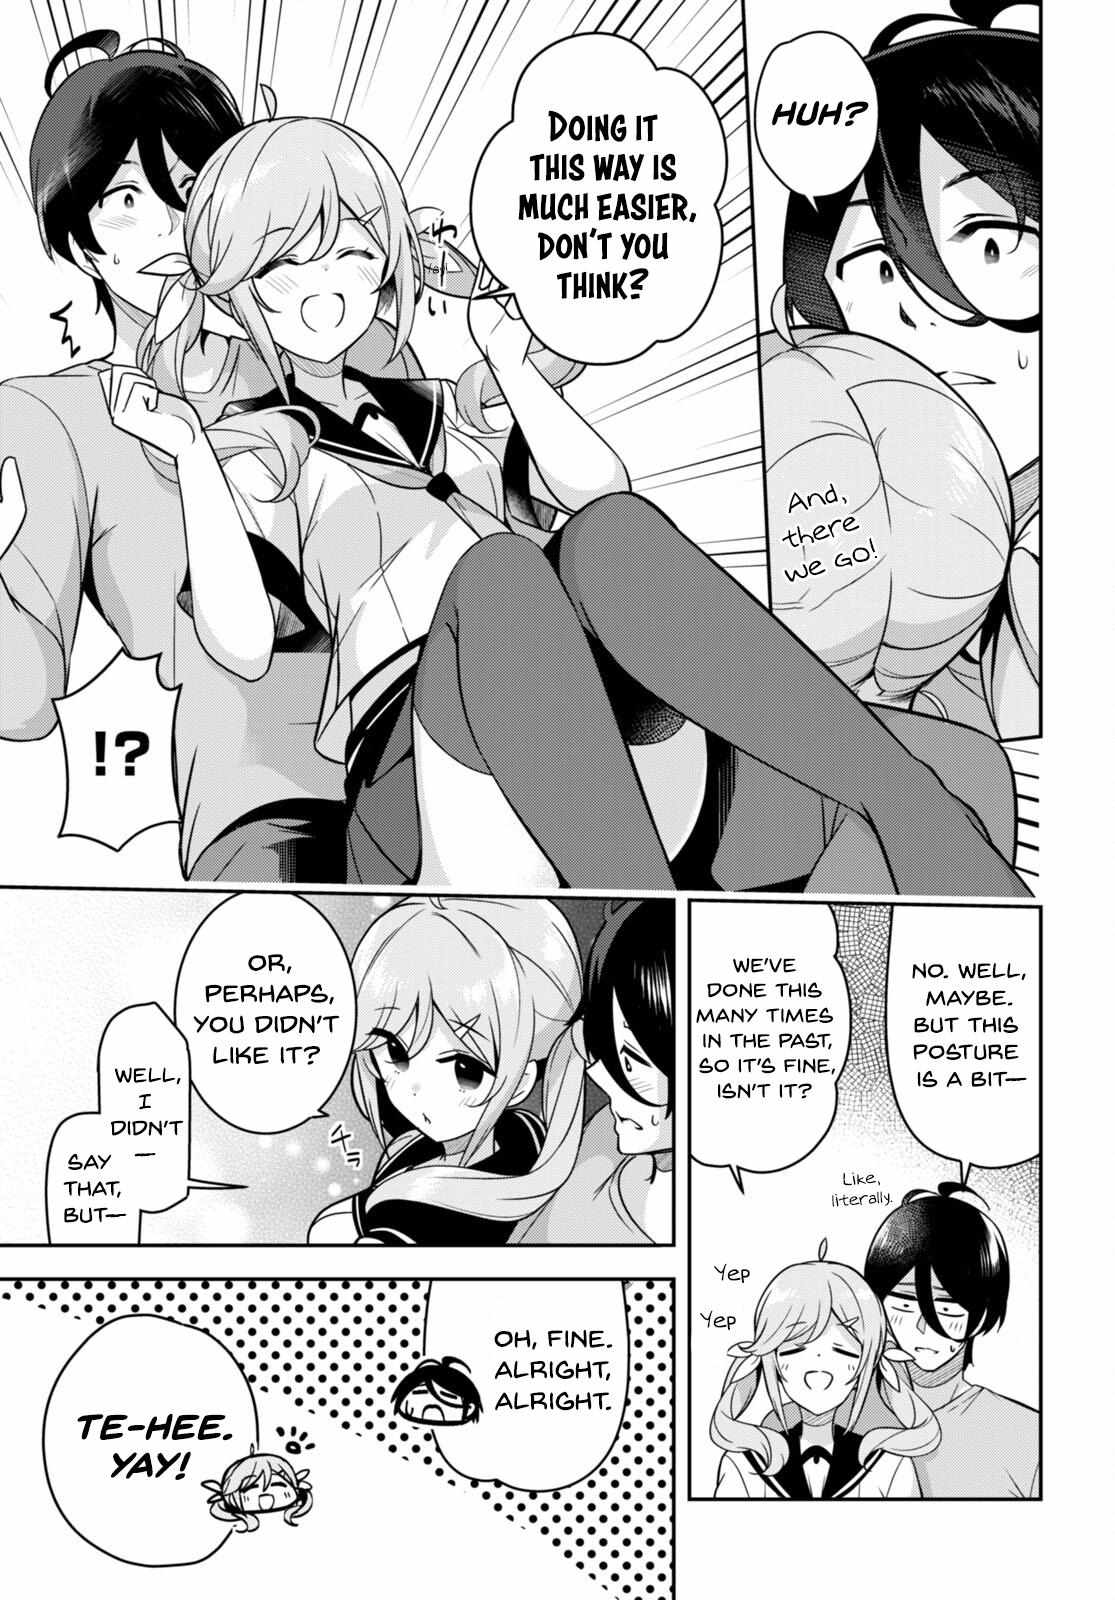 I Suddenly Have An "older" Sister! - 11 page 8-4e6ecc83